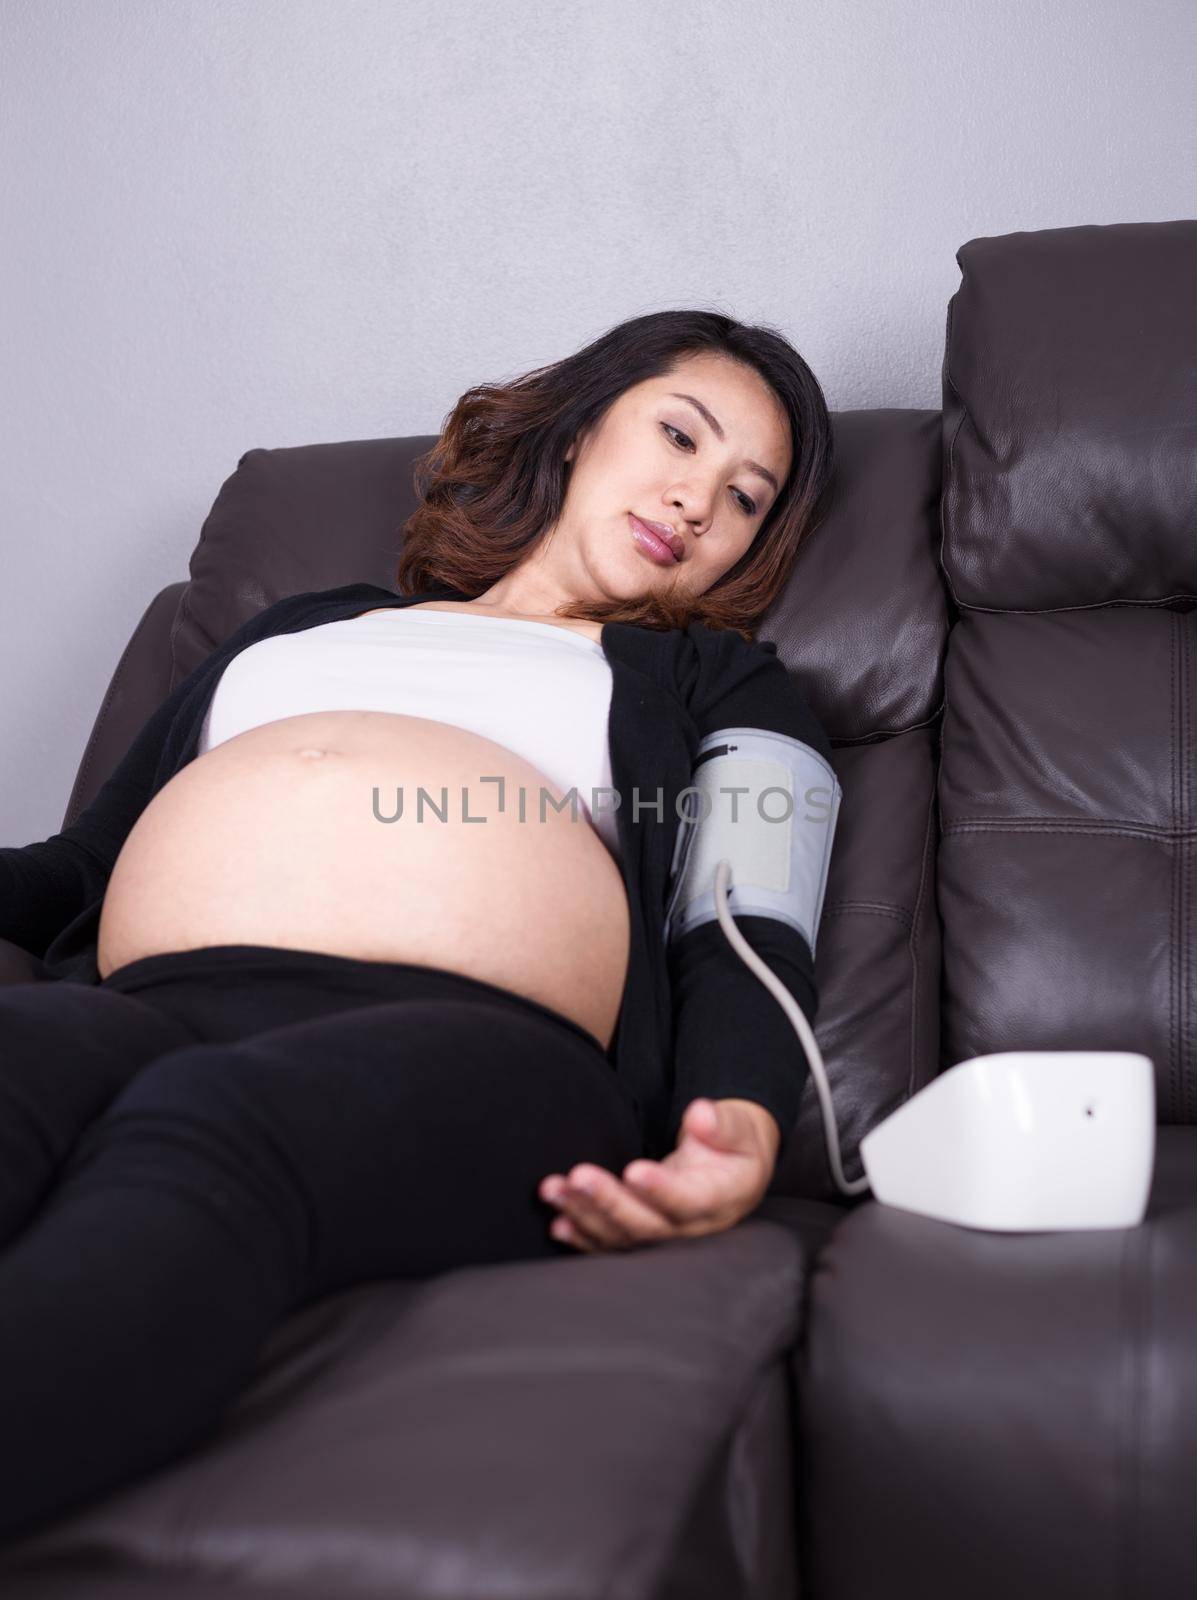 Pregnant woman measures blood pressure with sphygmomanometer by geargodz